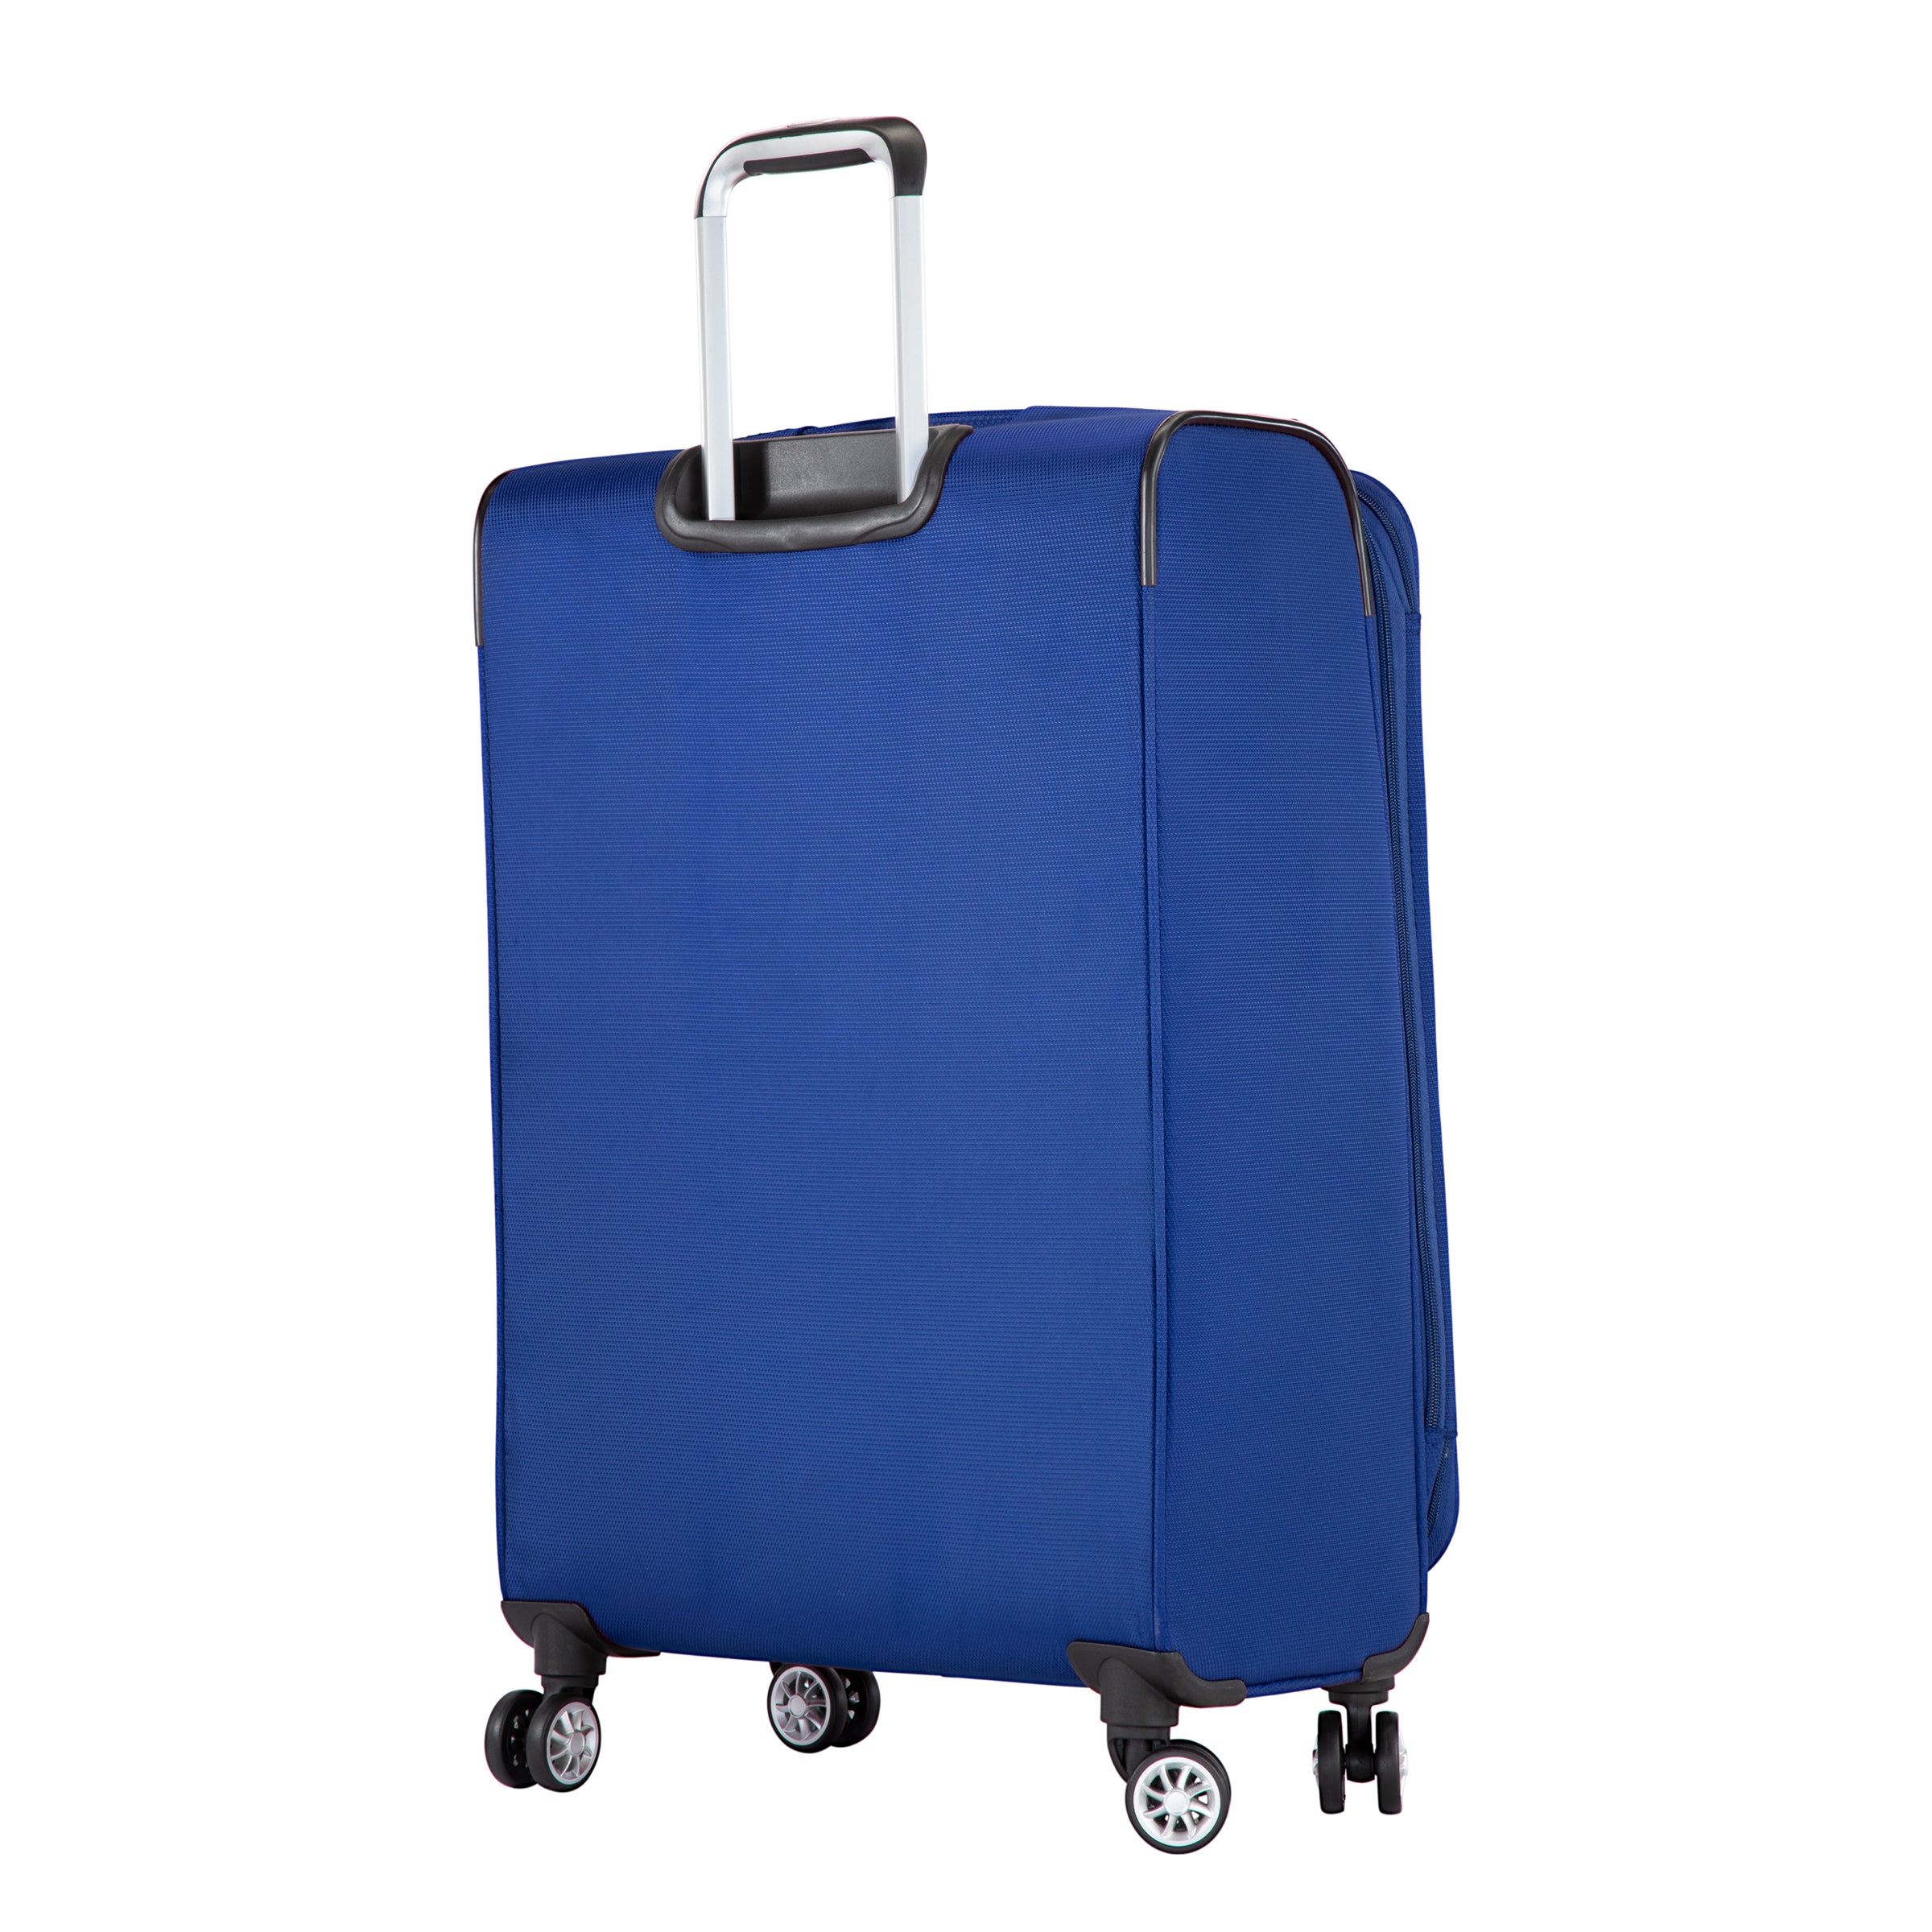 American Tourister - Just Bags Luggage Center